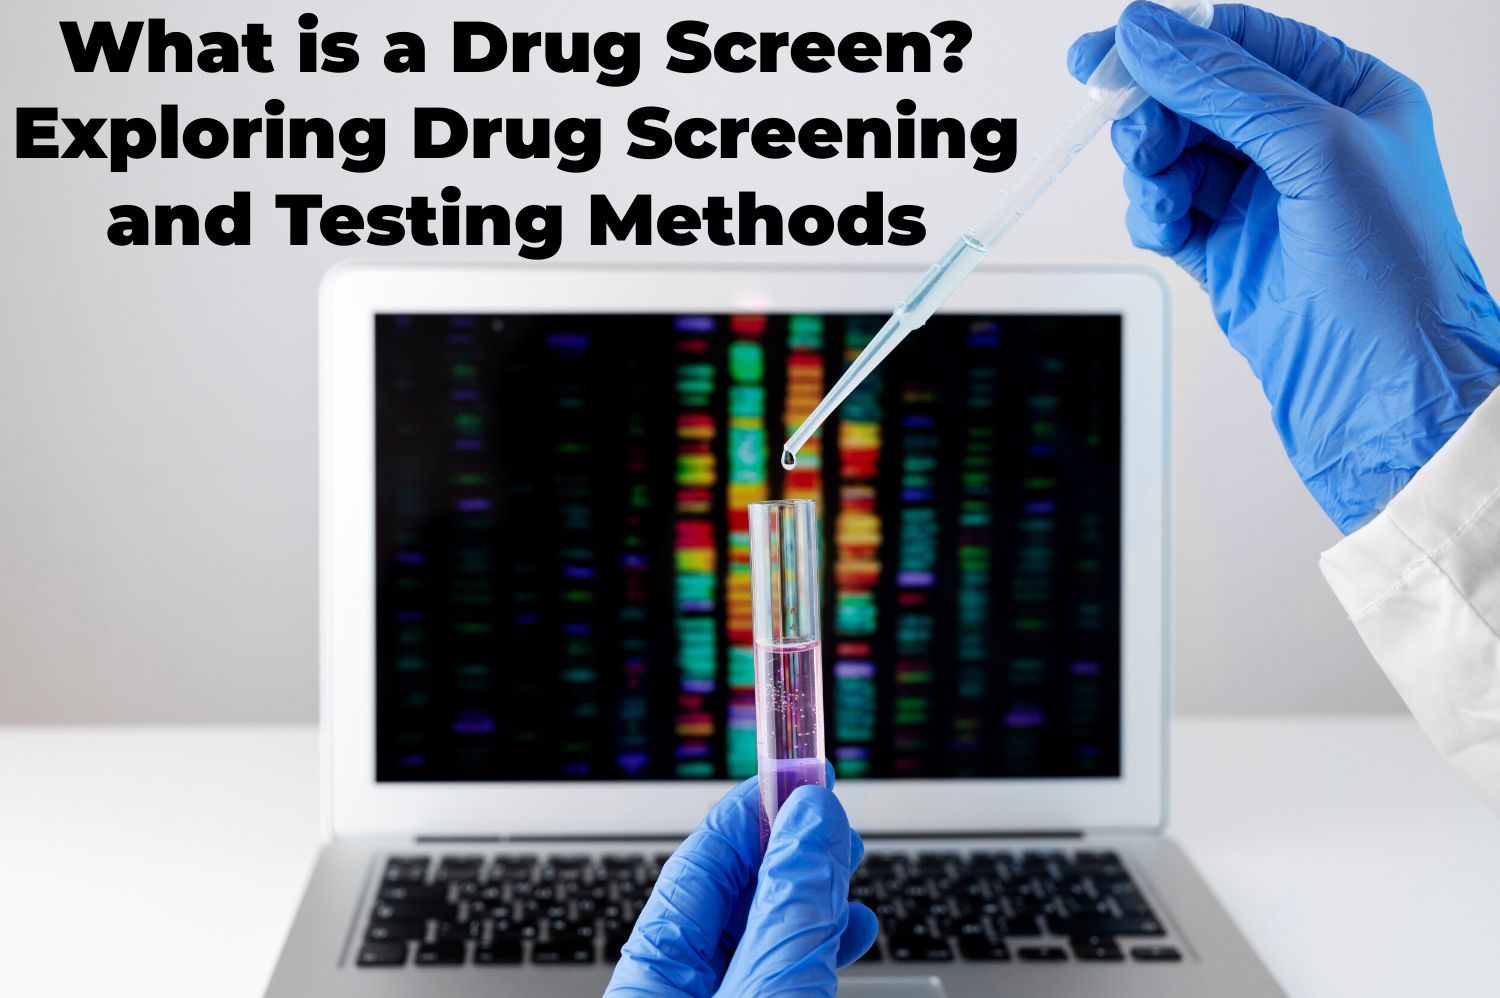 What is a Drug Screen